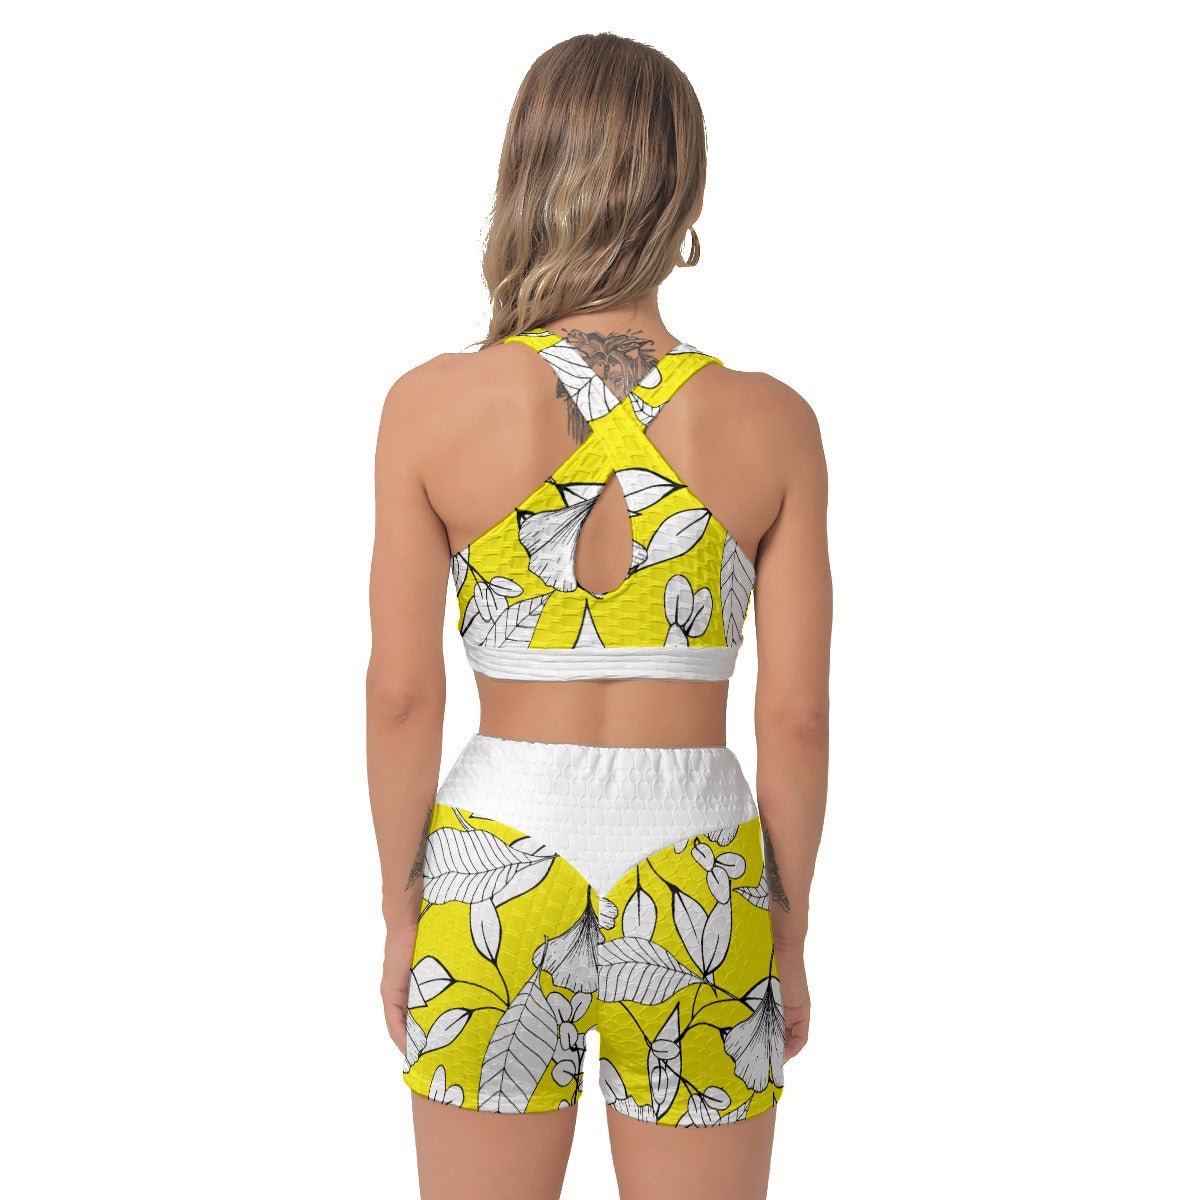 Summer Sketch Sports Bra and shorts set - AnimePhysique